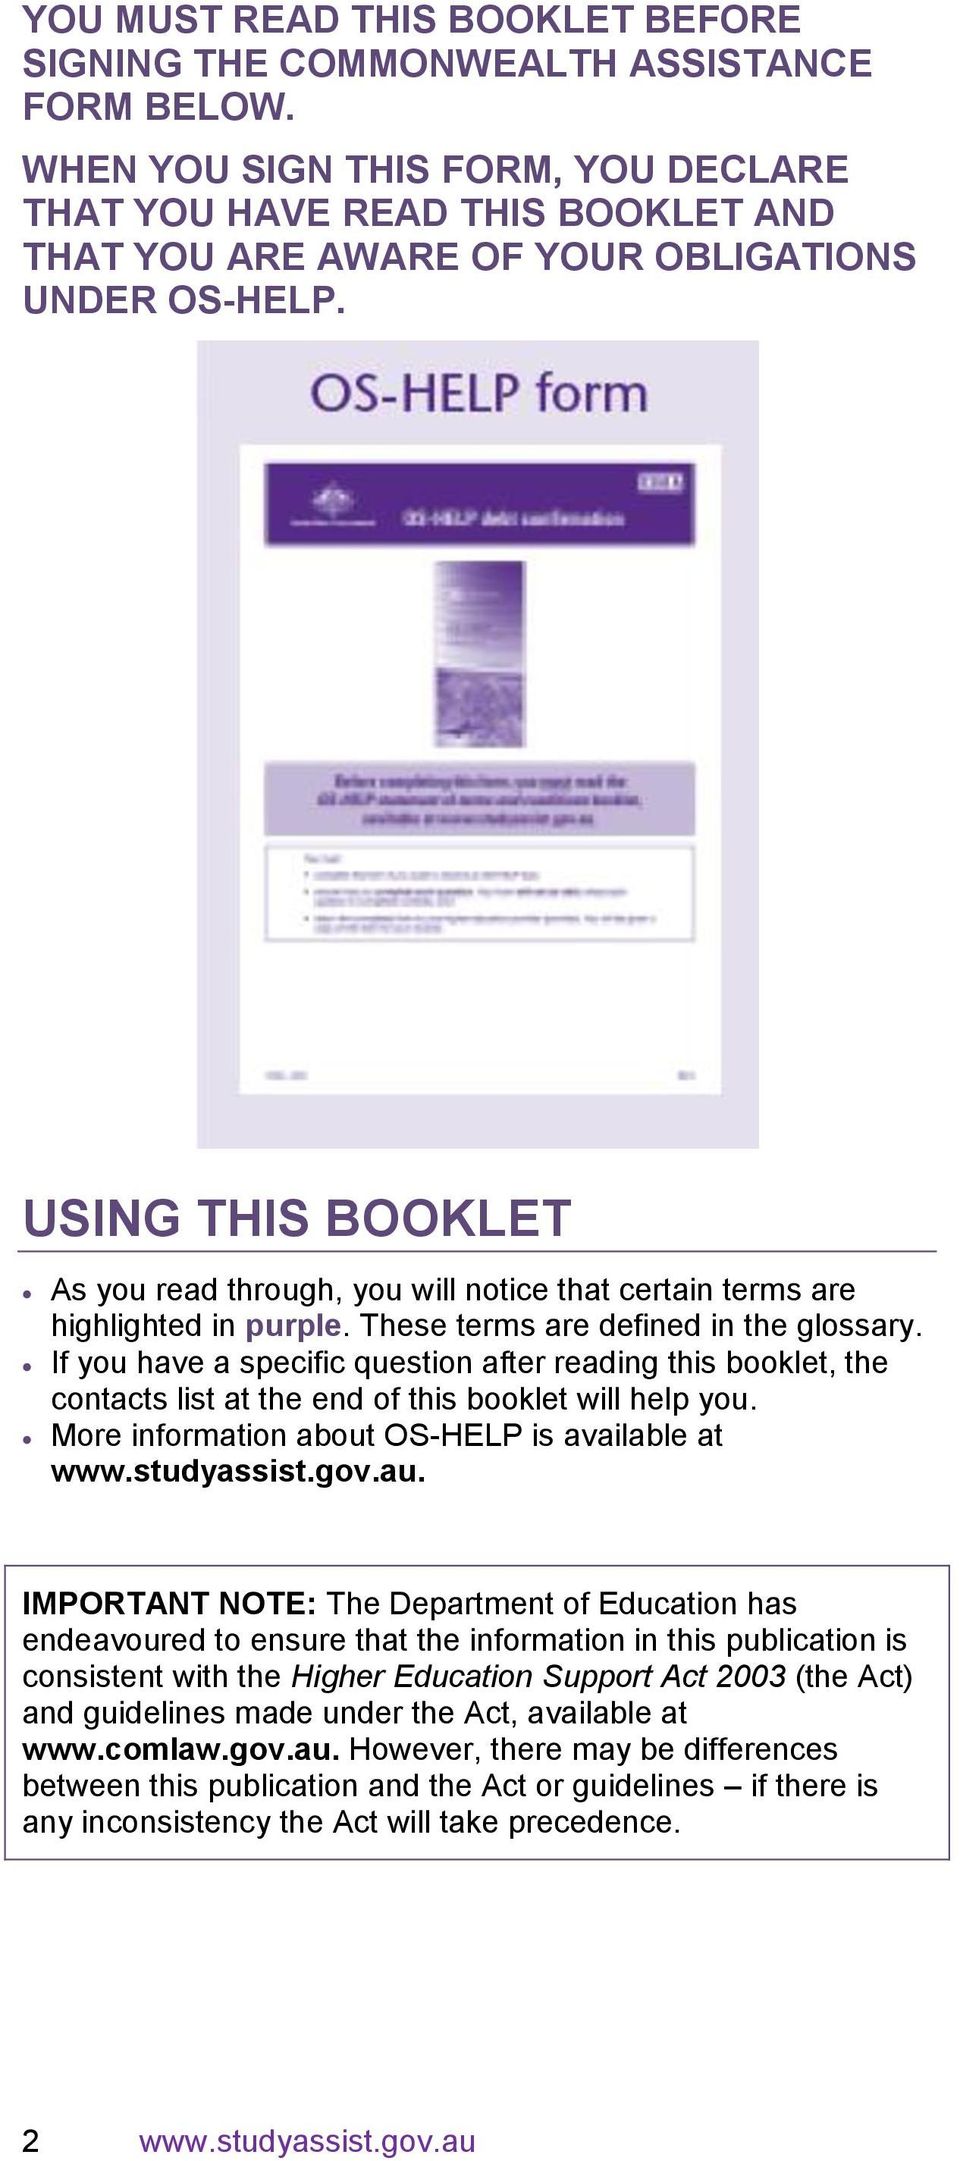 USING THIS BOOKLET As you read through, you will notice that certain terms are highlighted in purple. These terms are defined in the glossary.